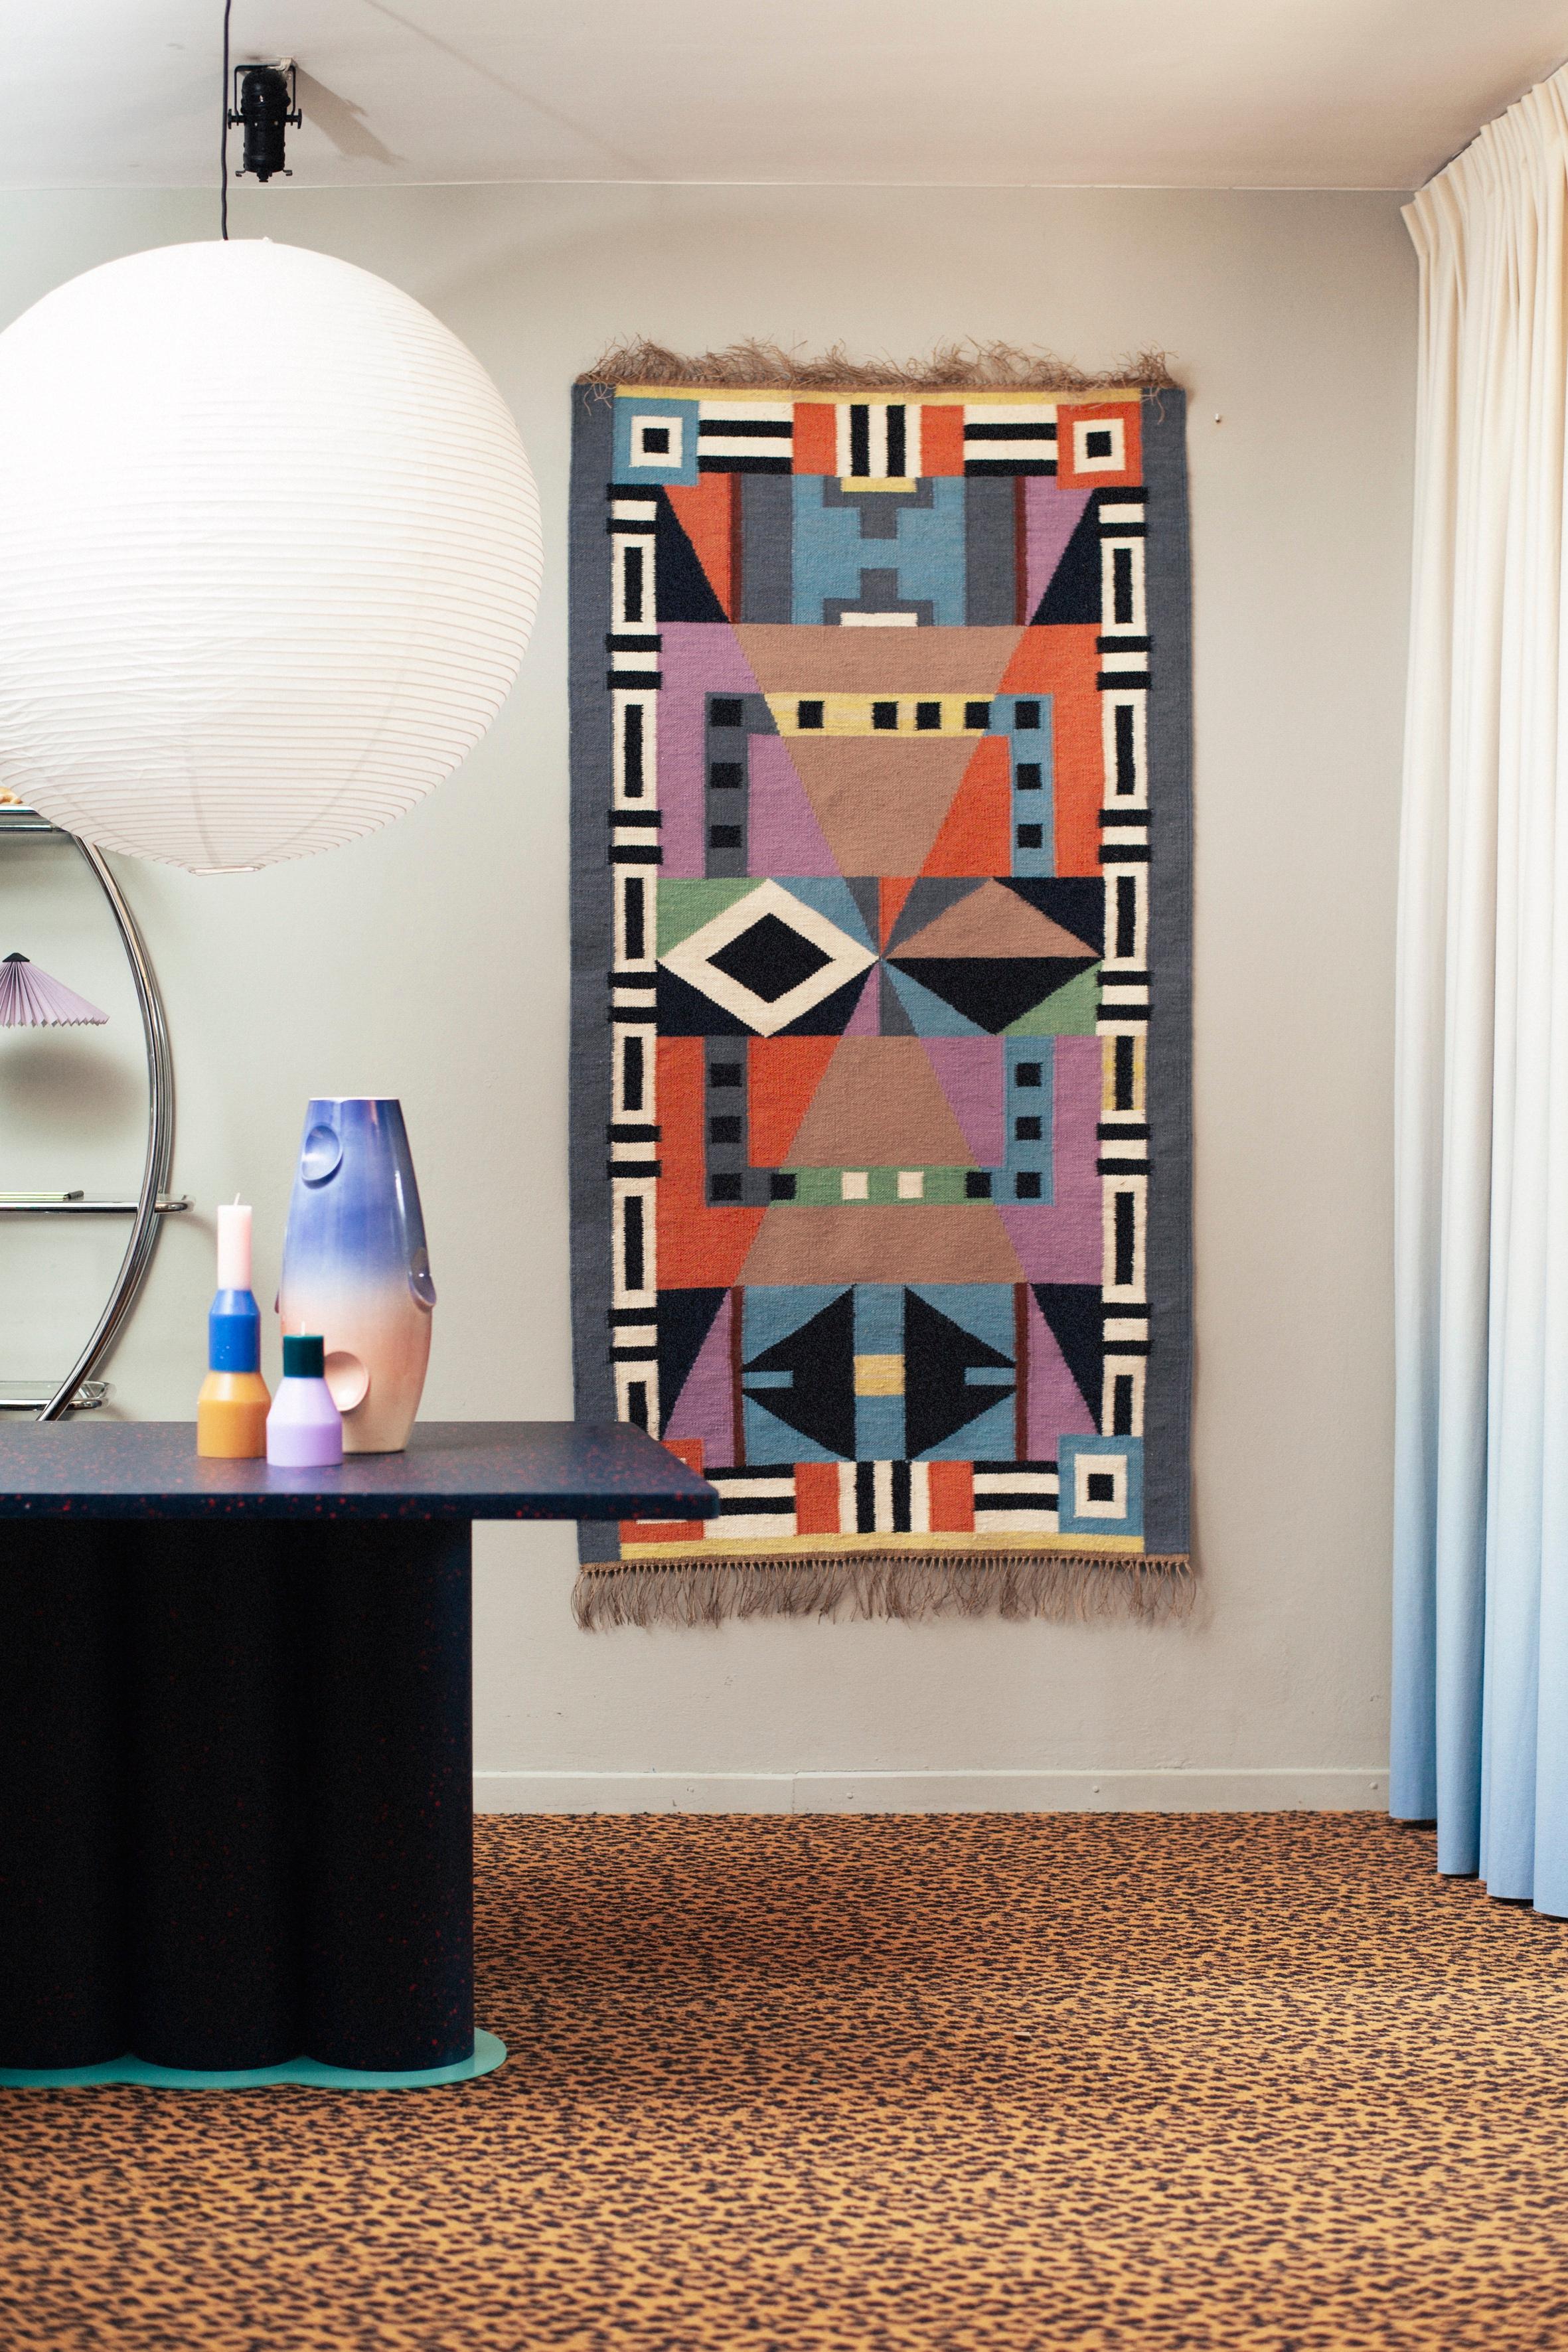 The RAPALLO kilim opens a series inspired by the Memphis Milano aesthetic, which defined the colorful design style of the 1980s and 90s. The designer. Piotr Niklas, in his own unique way, transformed the realizations of such designers as Ettore